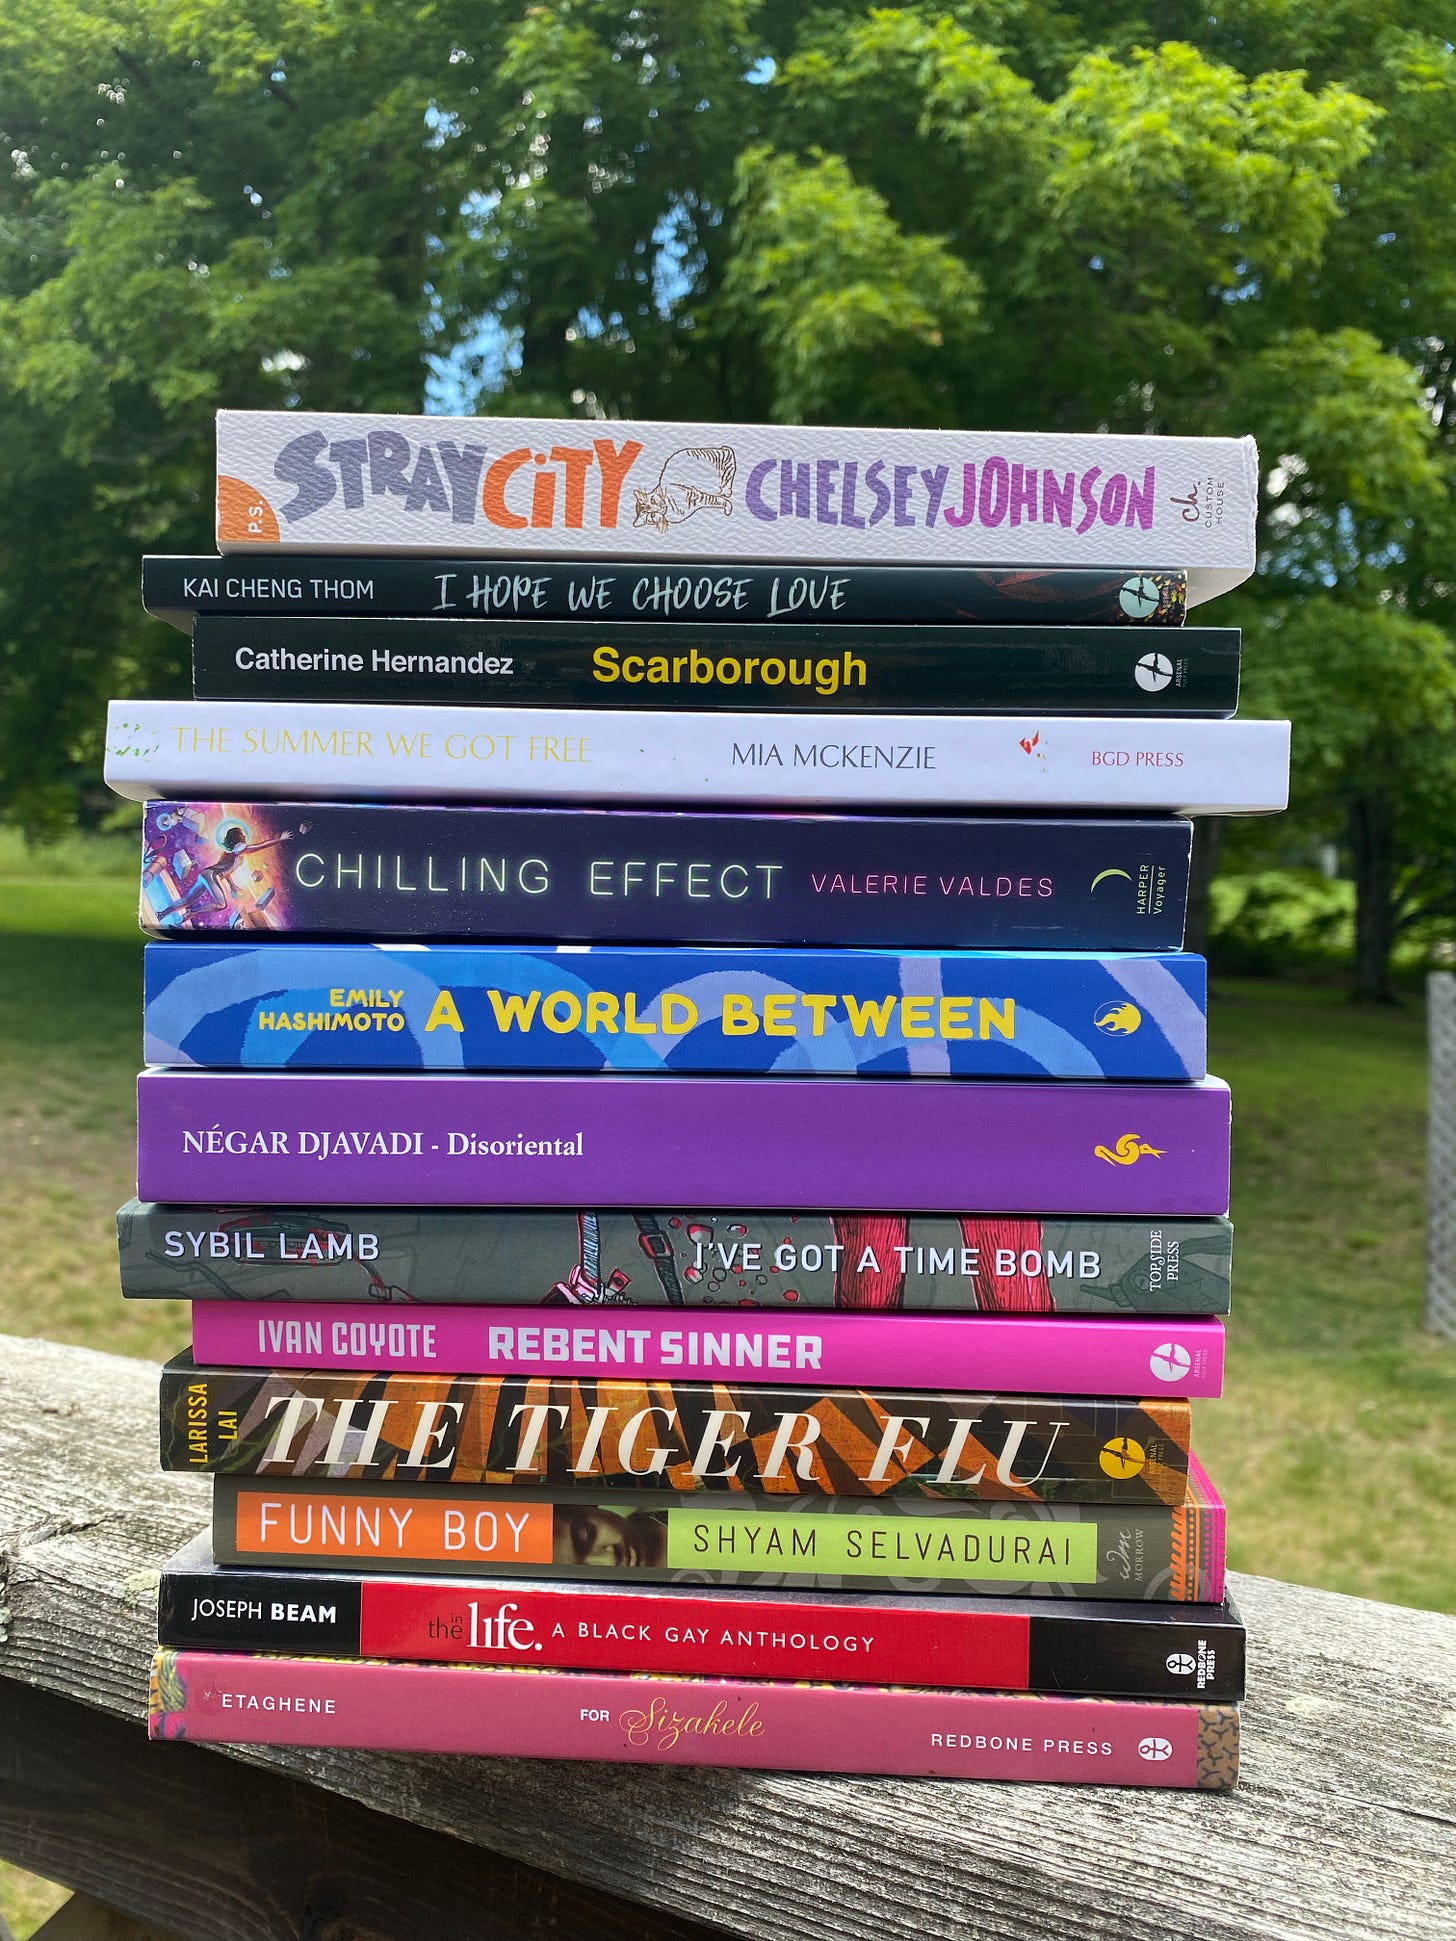 A large stack of books on a wooden porch railing in front of a large maple tree. In addition to the titles listed above, the stack includes: Stray City, Chilling Effect, Disoriental, I’ve Got a Time Bomb, The Tiger Flu, Funny Boy, In the Life, and For Sizakele.